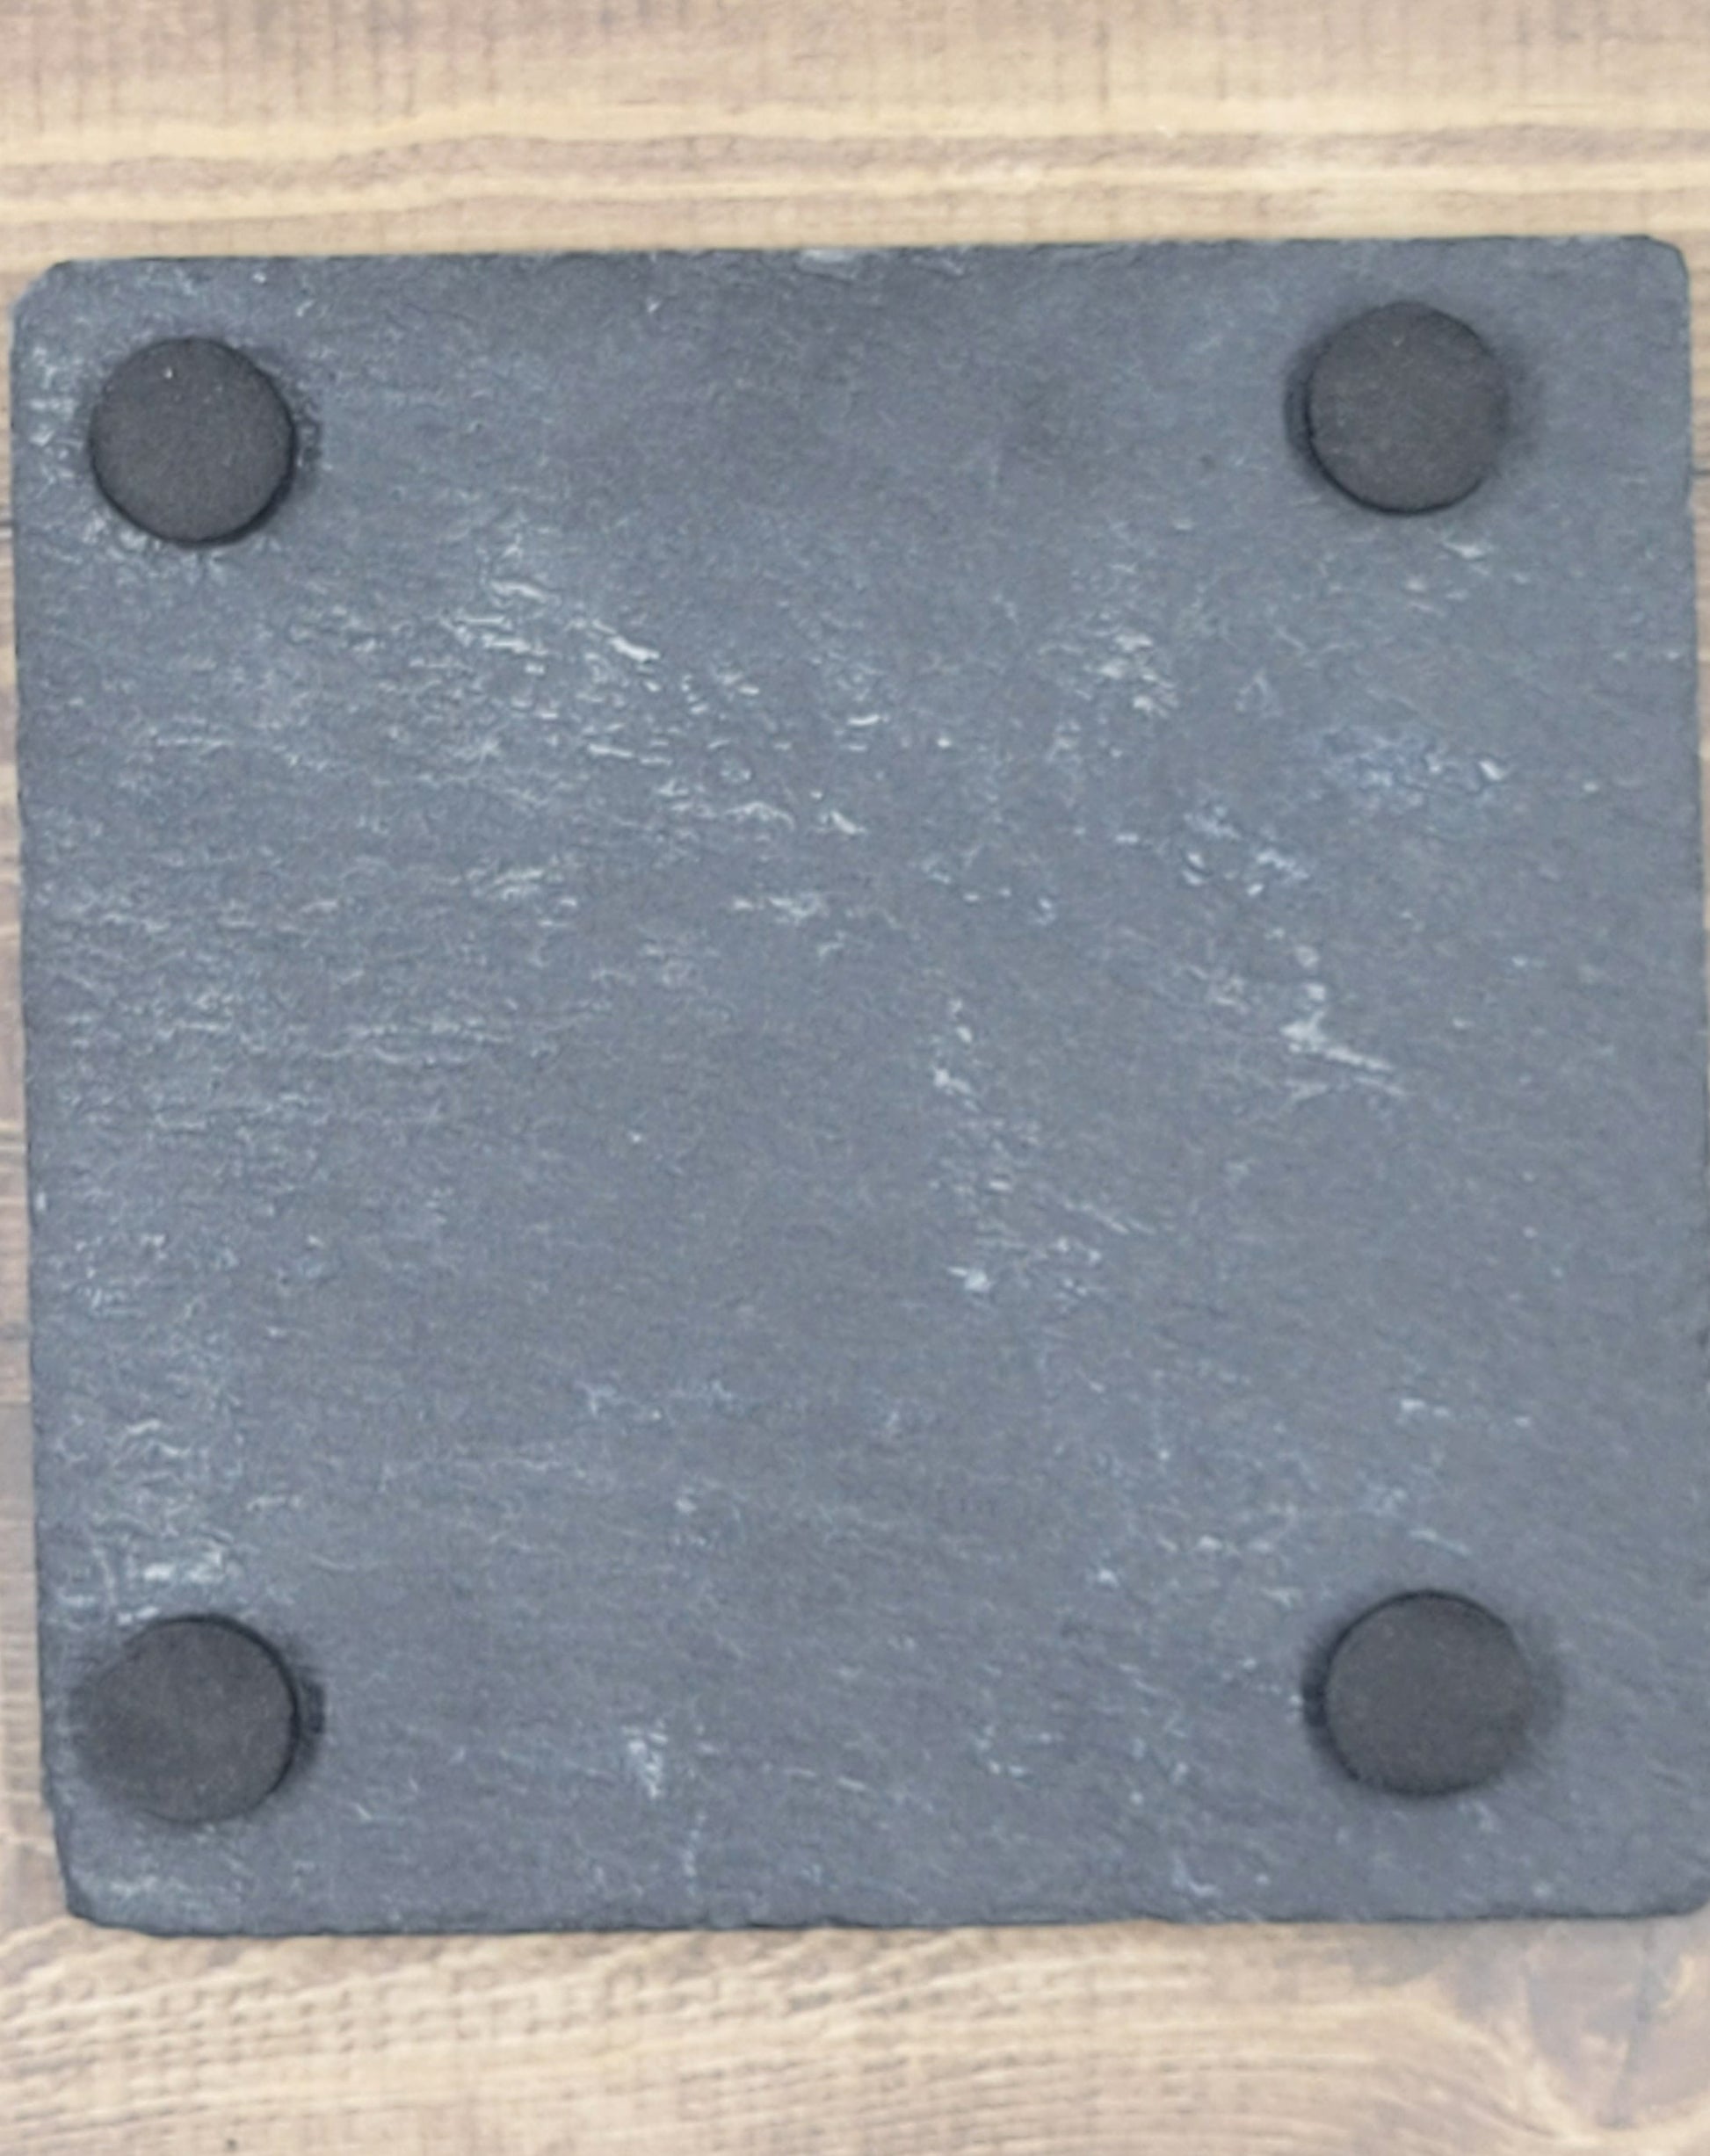 Woodford Reserve Distillery Natural Slate Coaster  These slate coasters will make a great addition to anyplace from your bar to your coffee table. These are actual stone slate measuring approximately 4" x 4". Each coaster will have 4 foam padded feet